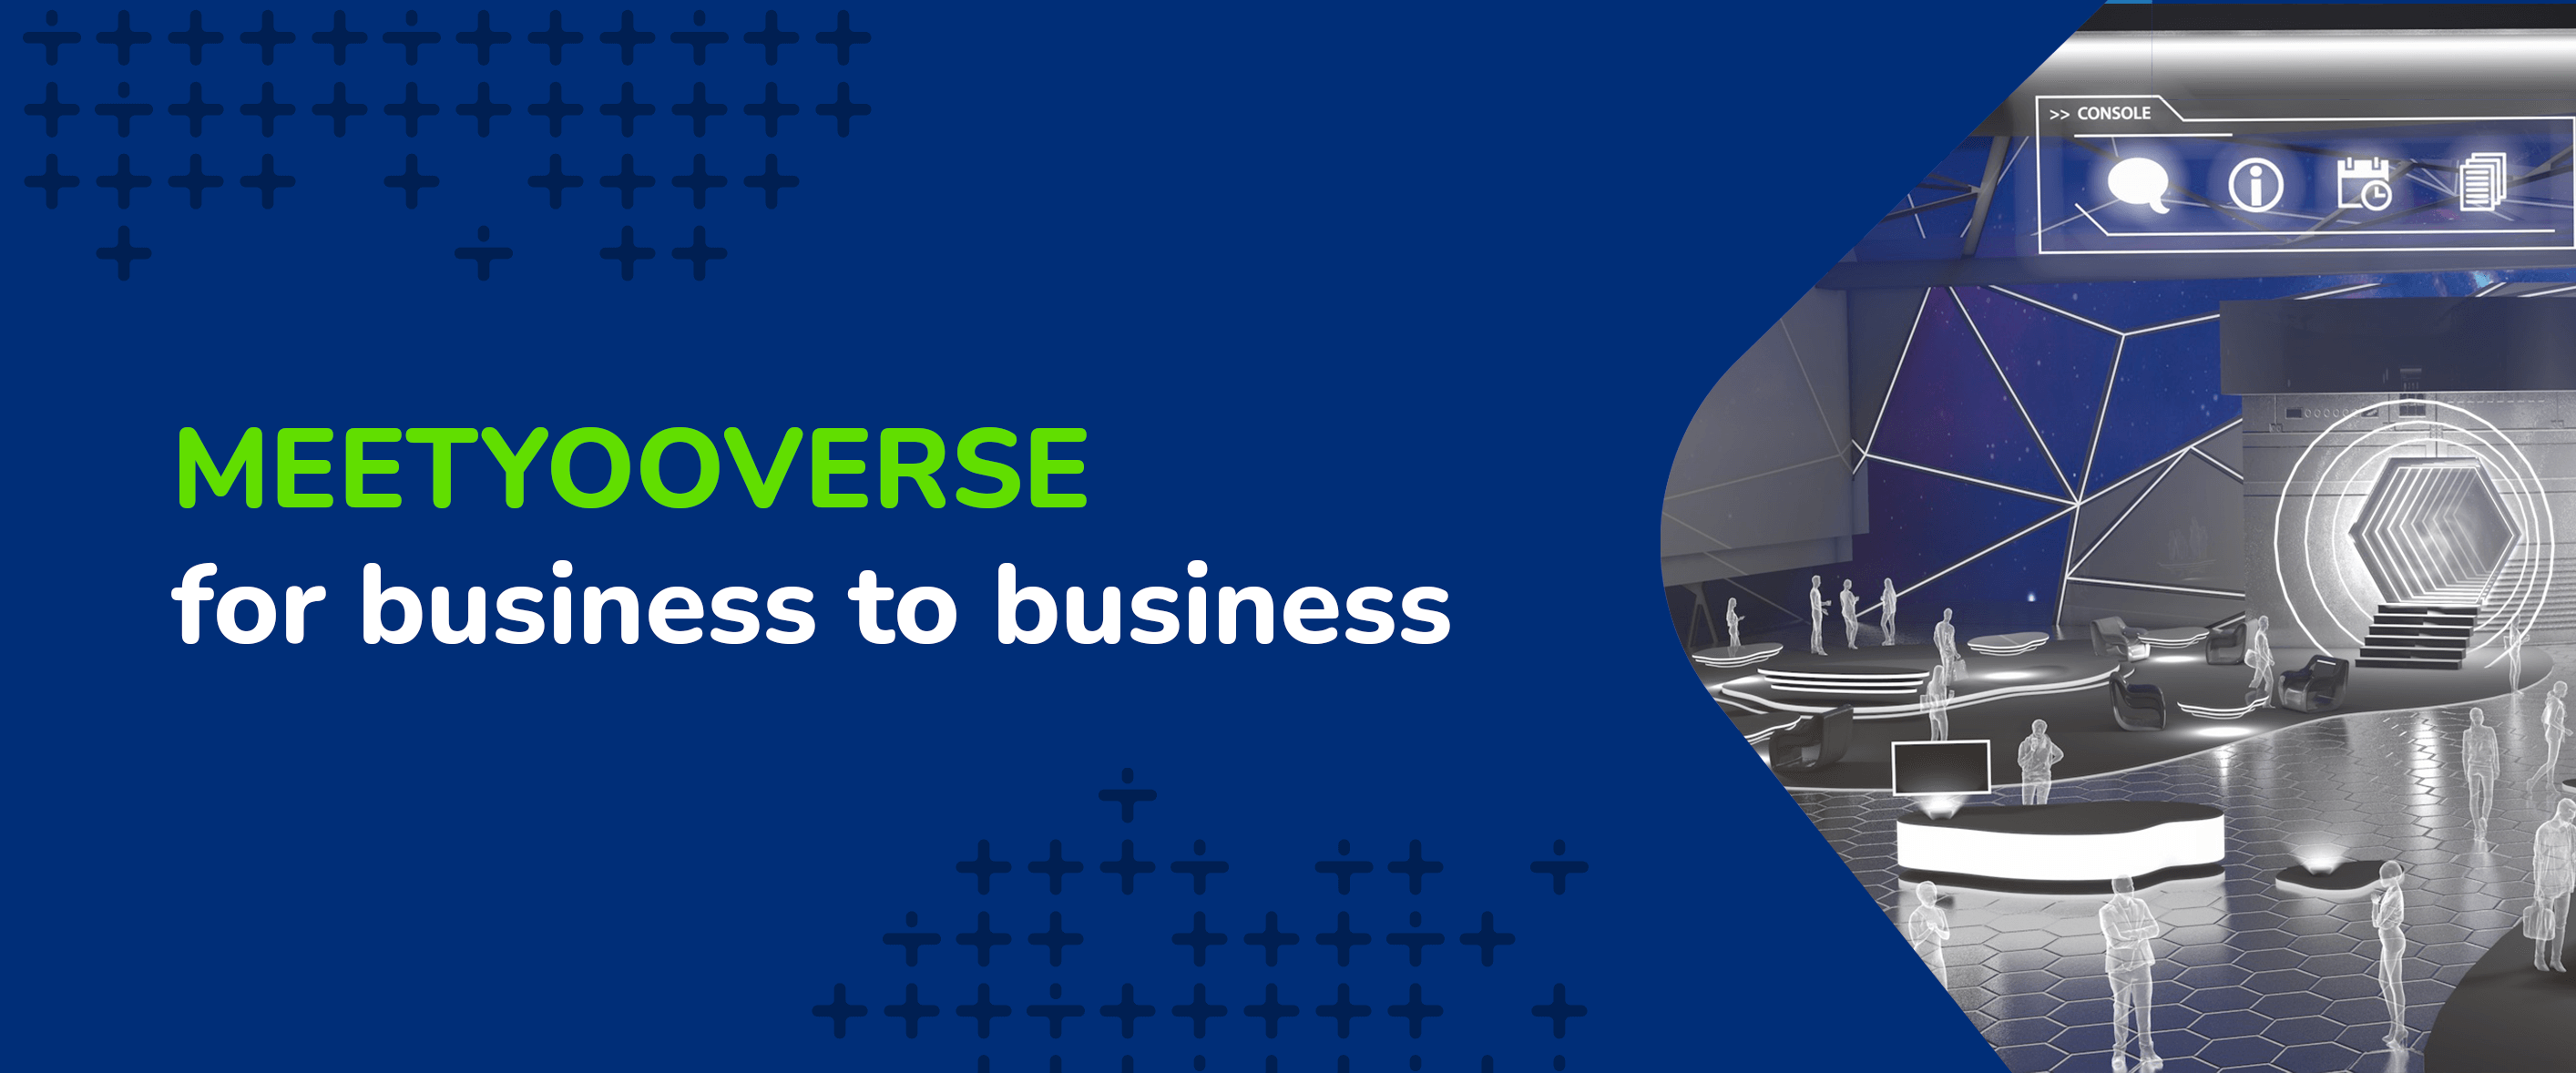 MEETYOOVERSE for business to business - MEETYOO